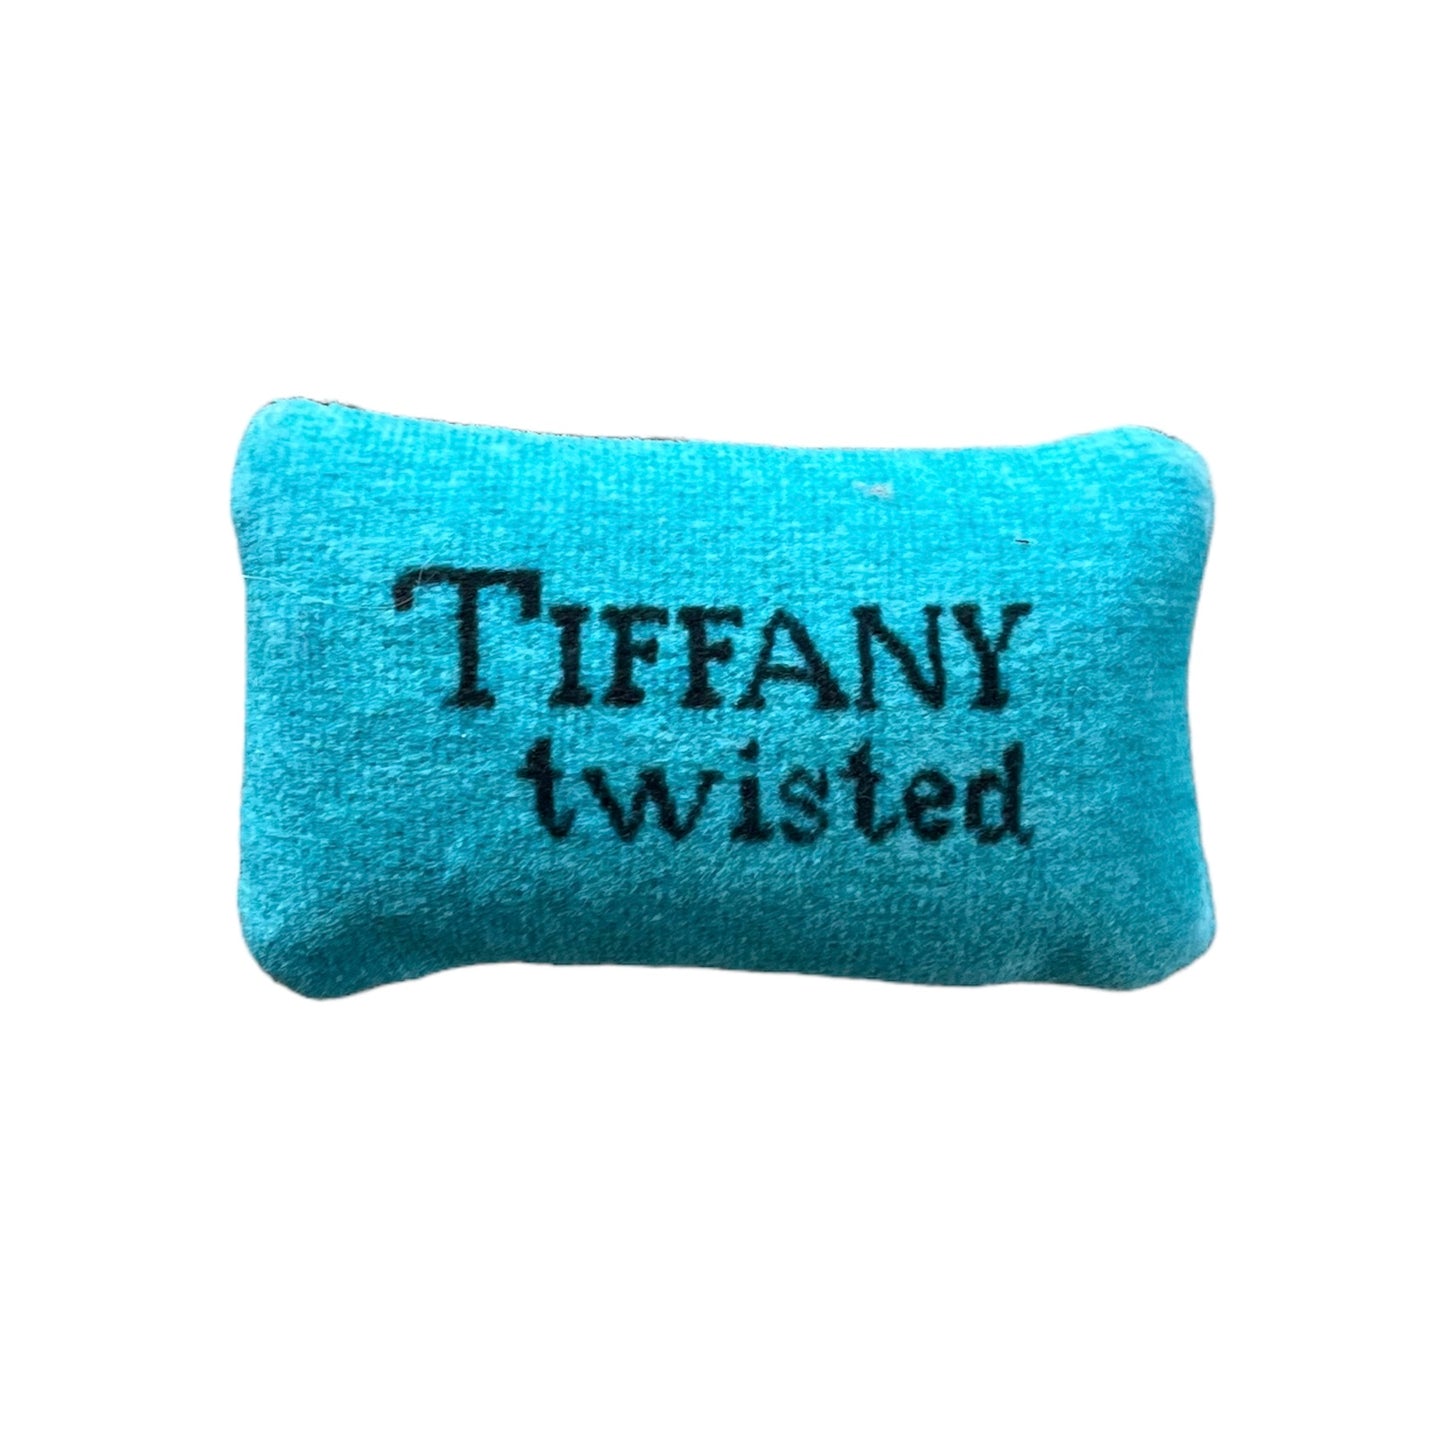 organic French lavender sachet reads "Tiffany Twisted" in classic Tiffany script on Tiffany blue background